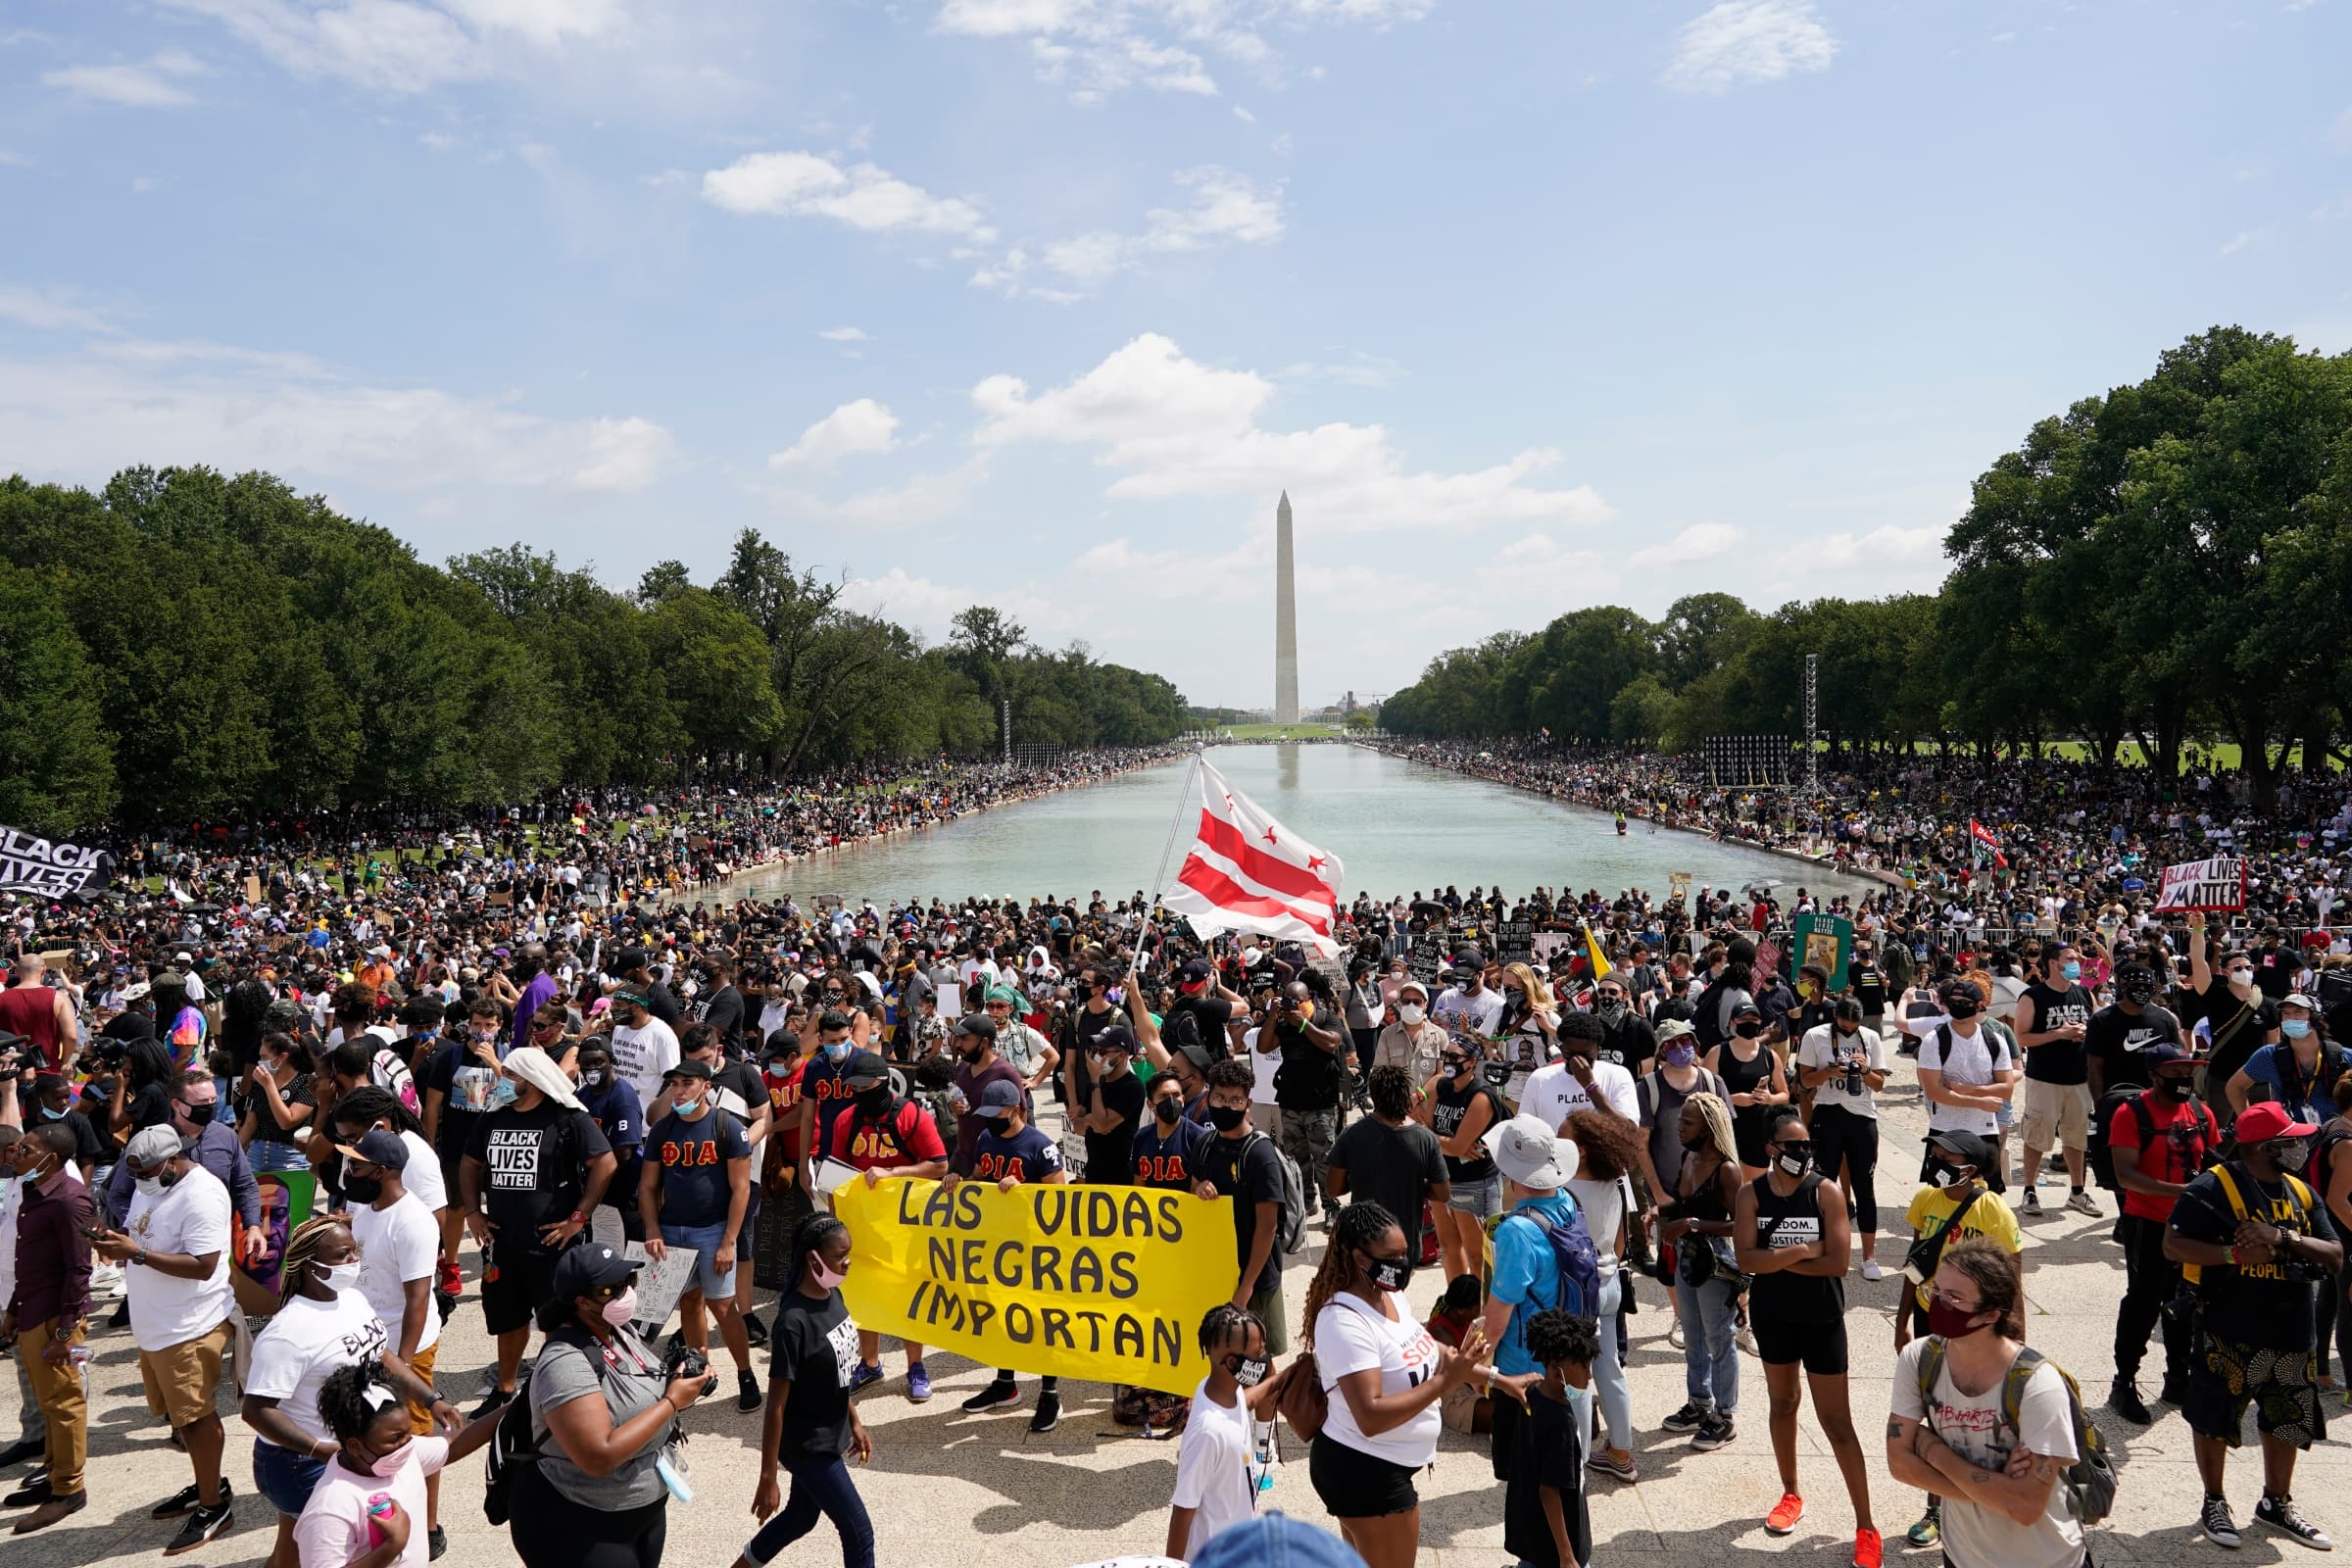 People attend the March on Washington on Friday Aug. 28, 2020, in Washington, on the 57th anniversary of the Rev. Martin Luther King Jr.’s “I Have A Dream” speech. (Carolyn Kaster/AP)